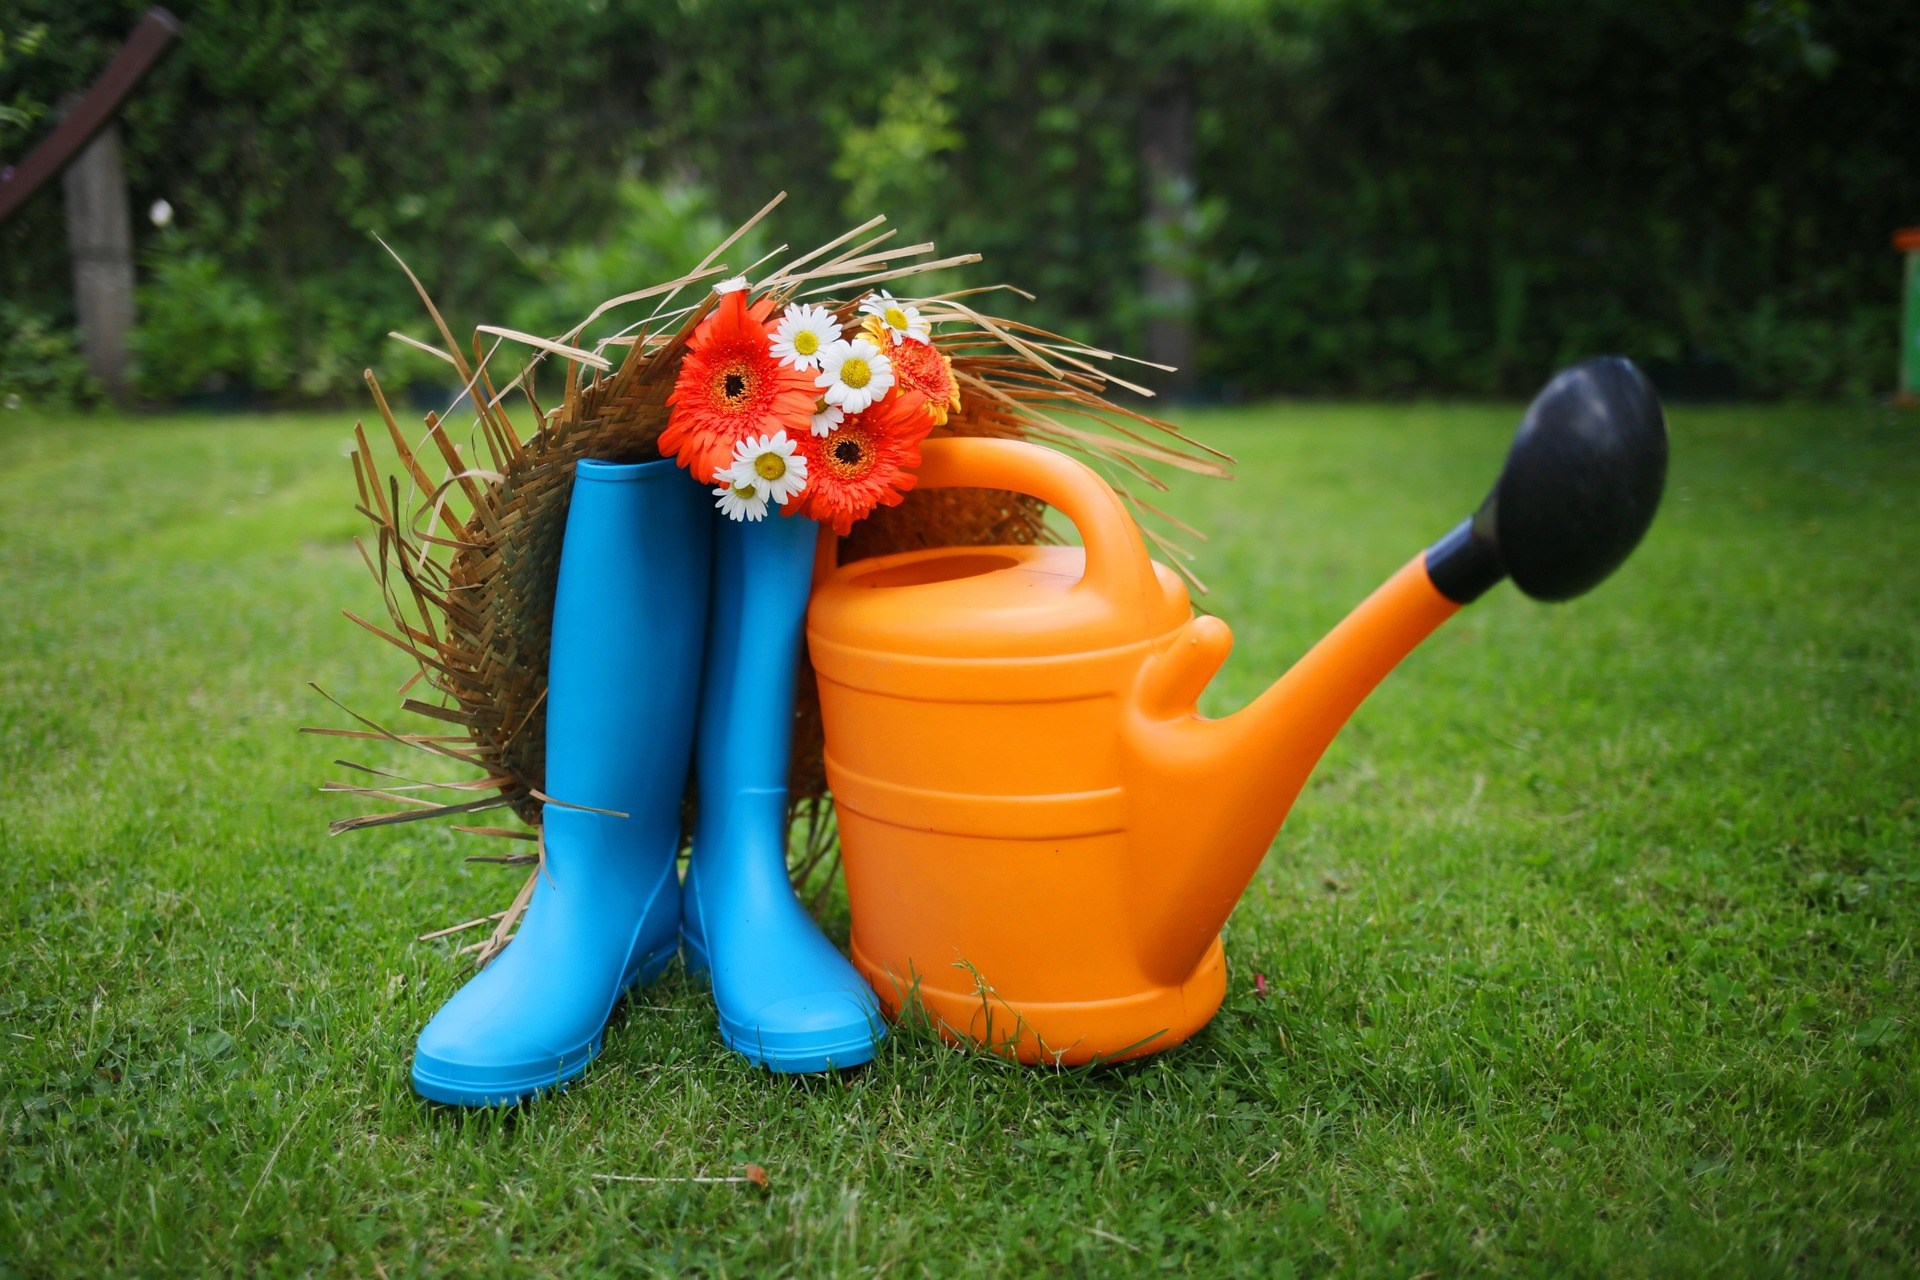 Orange watering can next to blue rubber boots on grass